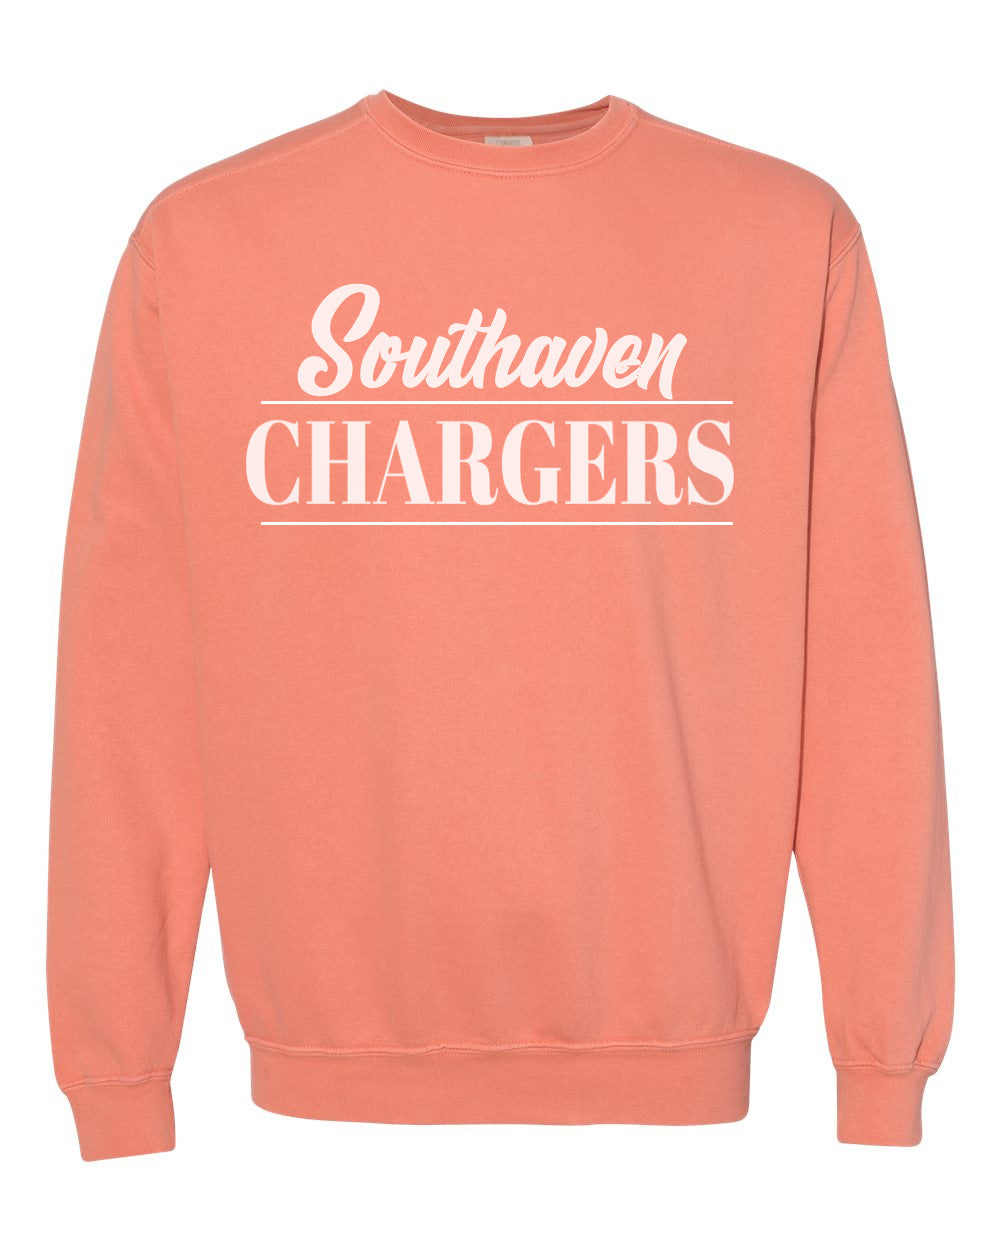 Southaven Chargers Comfort Colors Sweatshirts